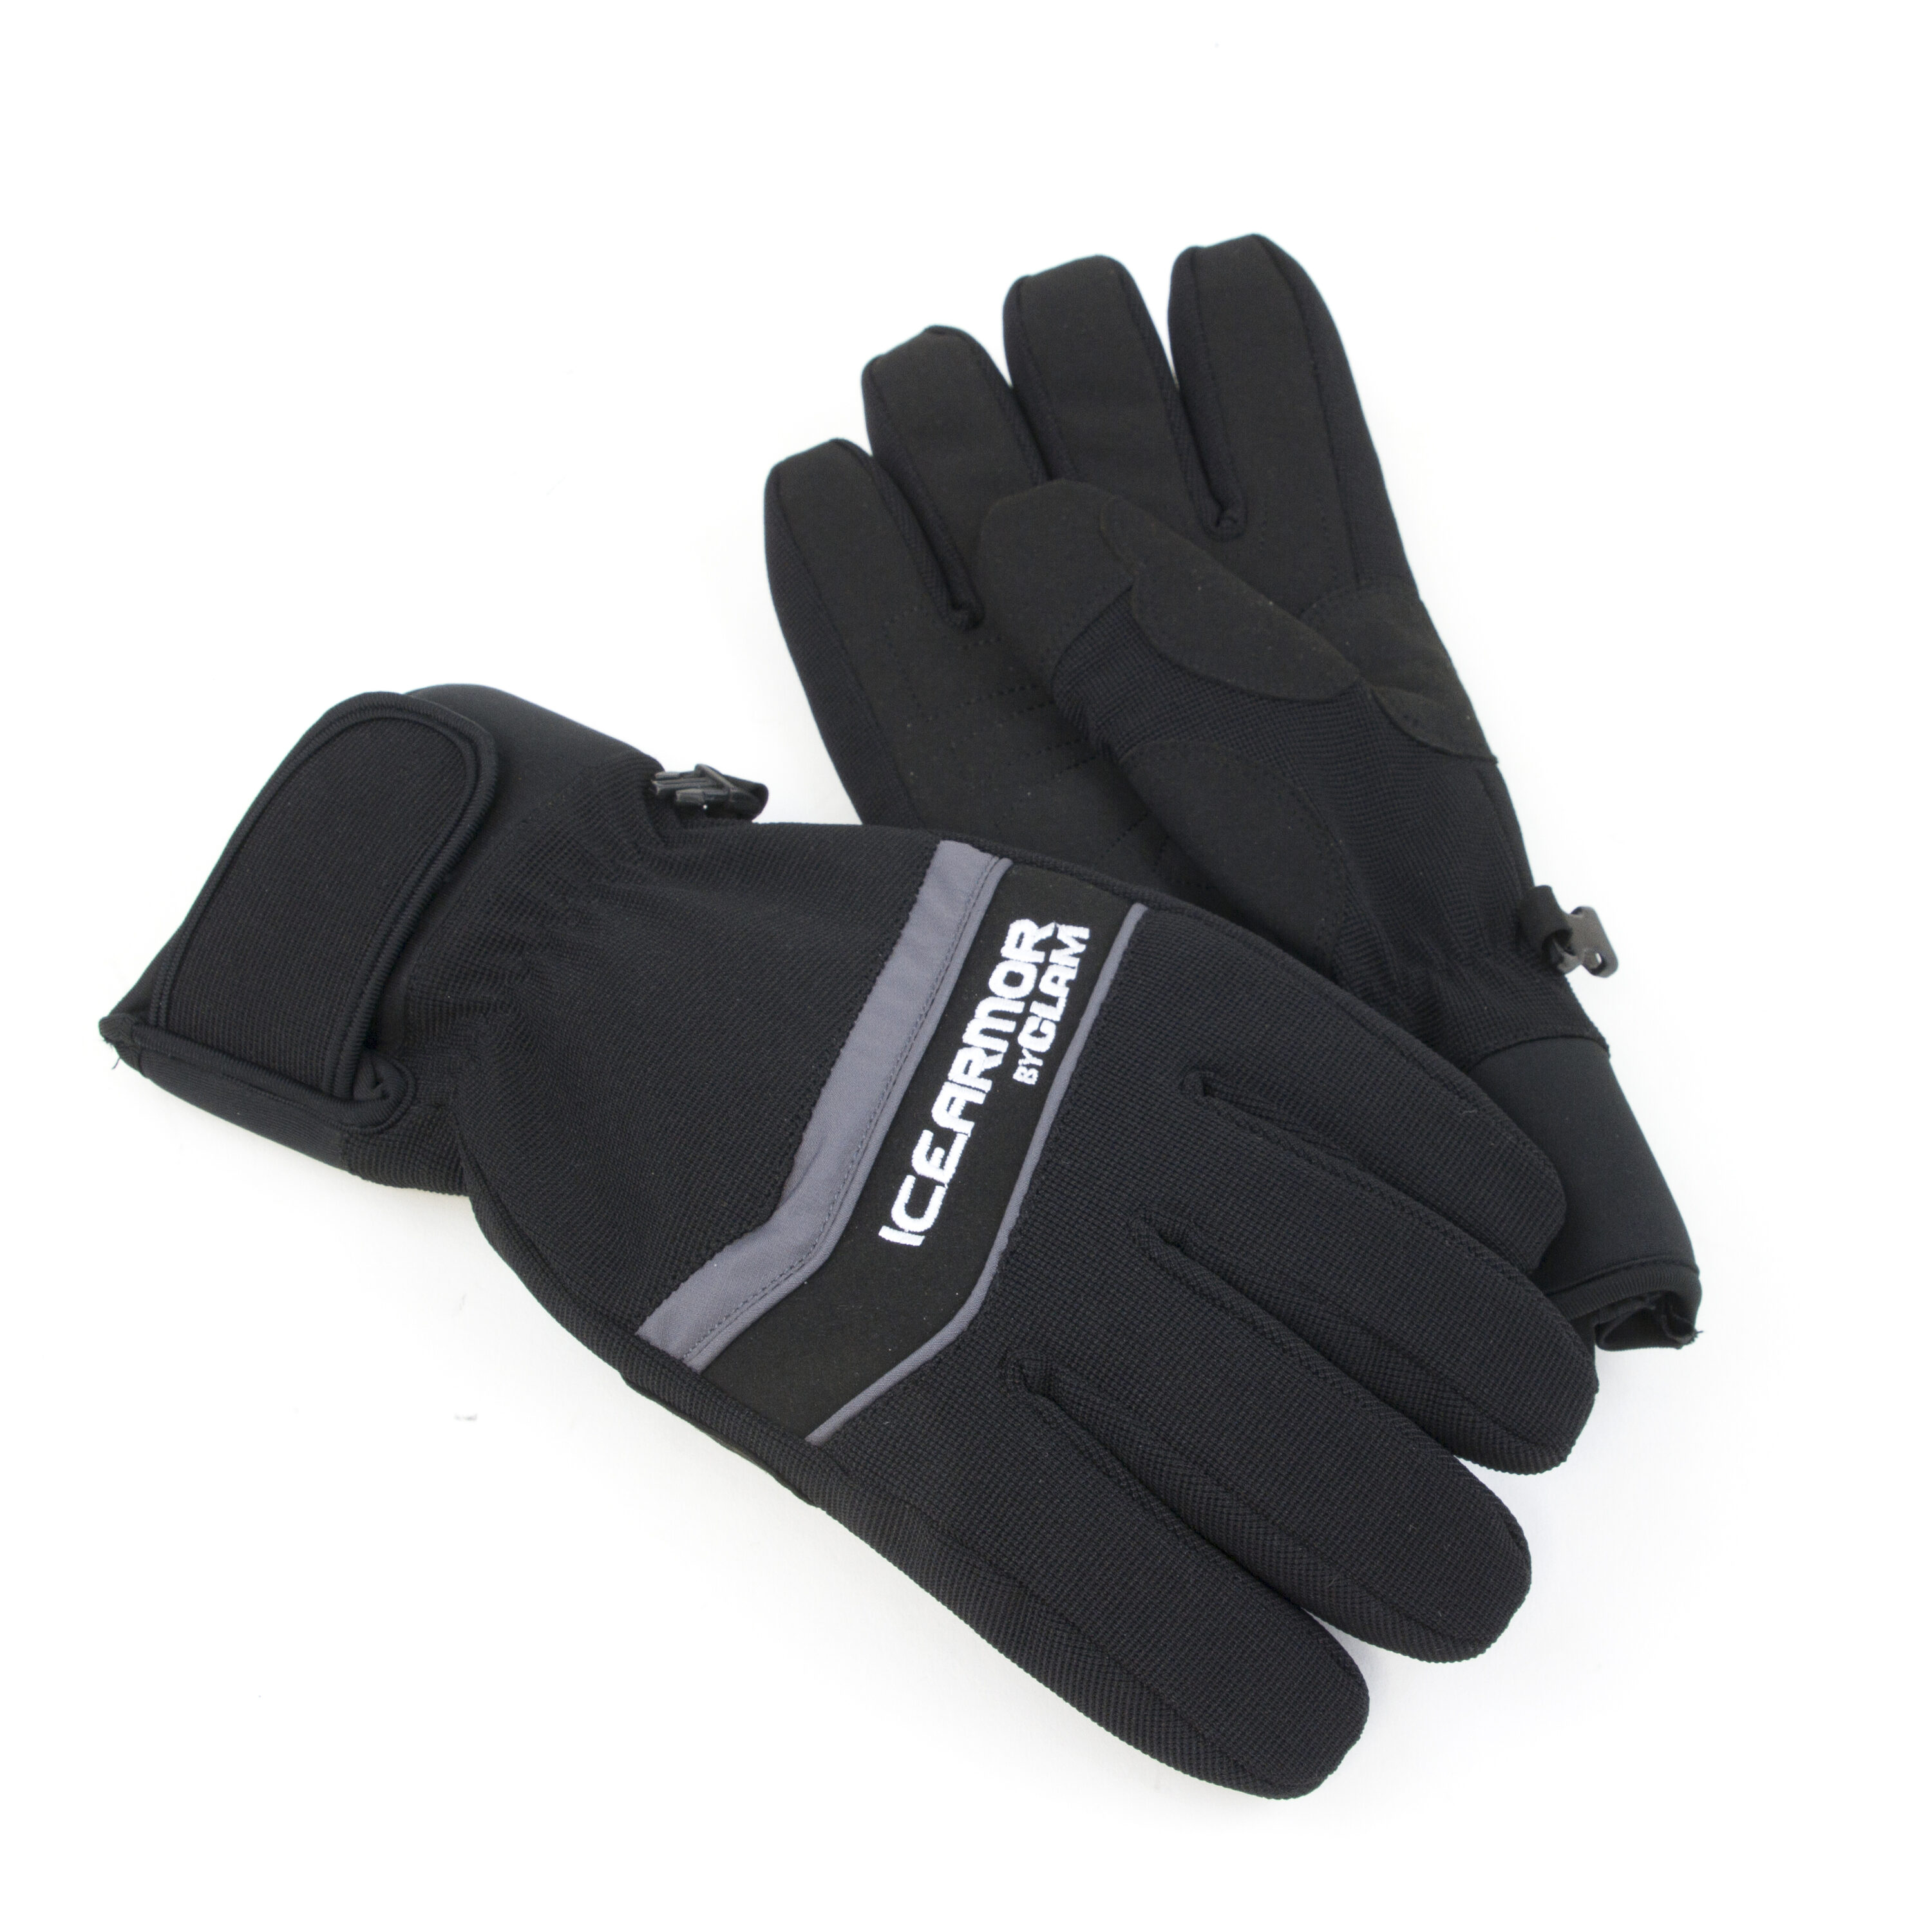 Clam Outdoors Edge Men's Ice Fishing Gloves - Black, Adult Small,  Thinsulate Insulation, Advanta Membrane, Pre-Curved Fingers, 3-Year  Warranty in the Fishing Gear & Apparel department at